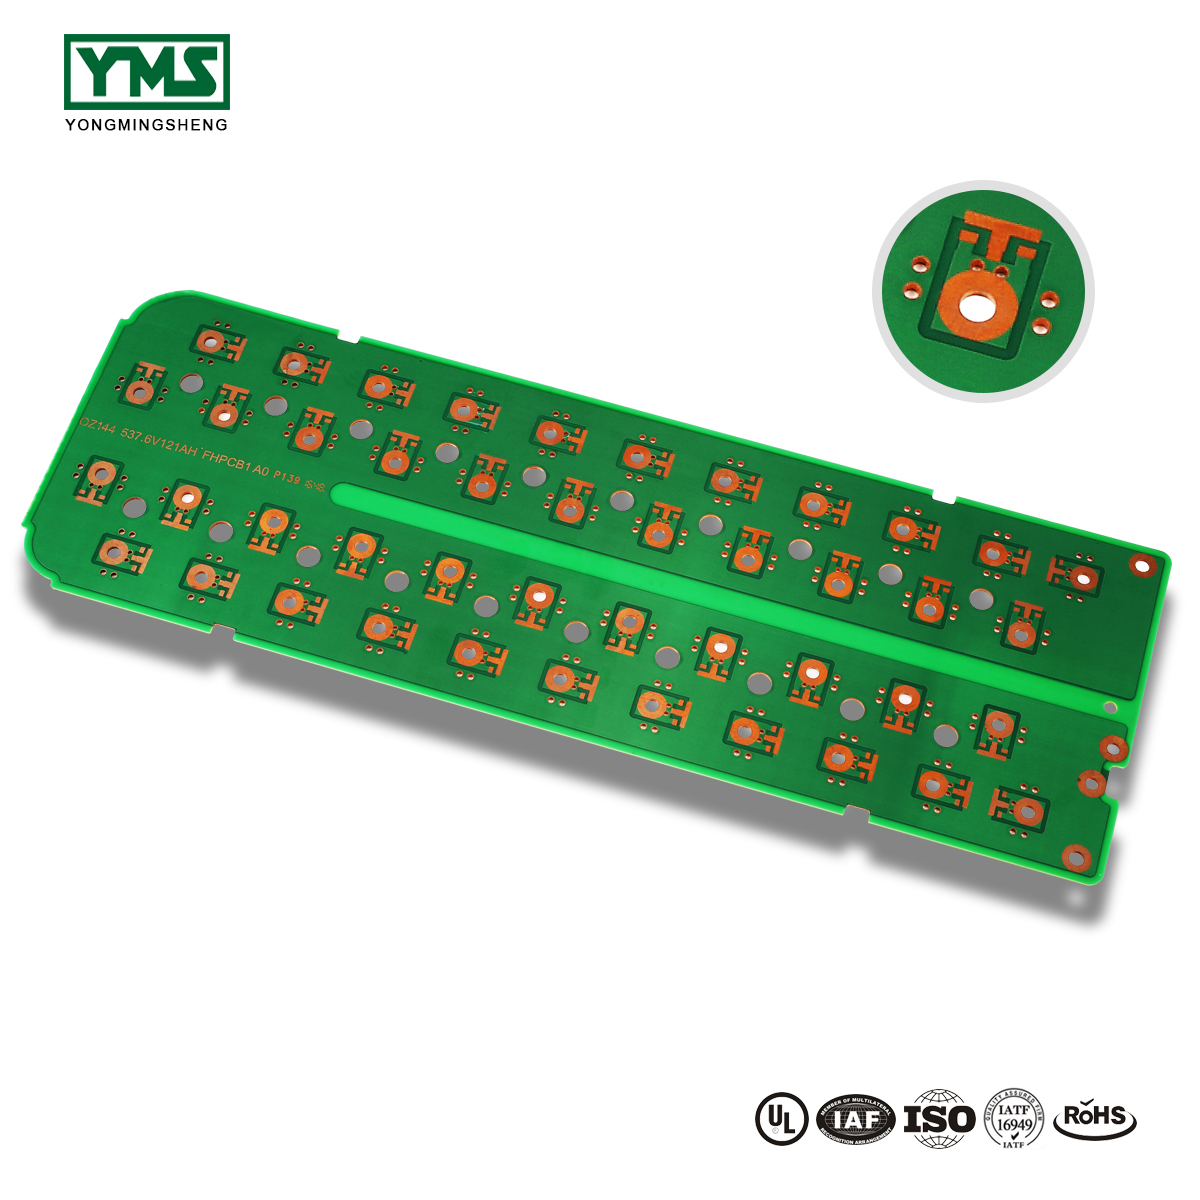 China Gold Supplier for 94v0 Bare Printed Circuit Board - 4Layer Copper base Board | YMS PCB – Yongmingsheng